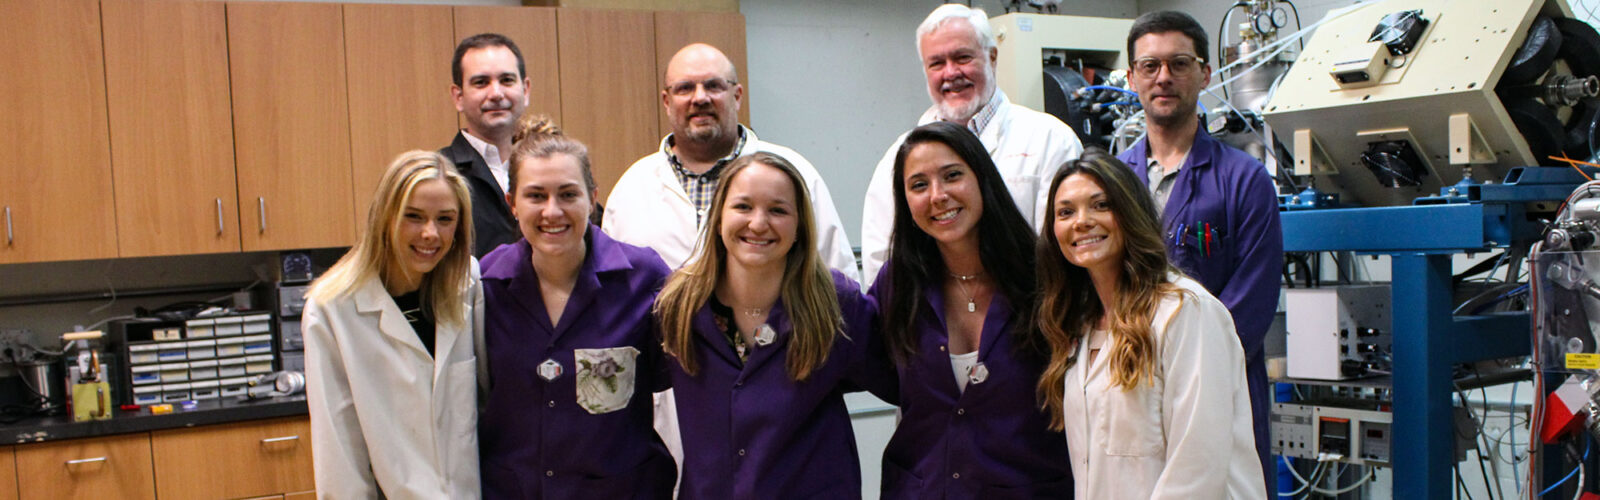 cyclotron team group photo with scientists wearing lab coats